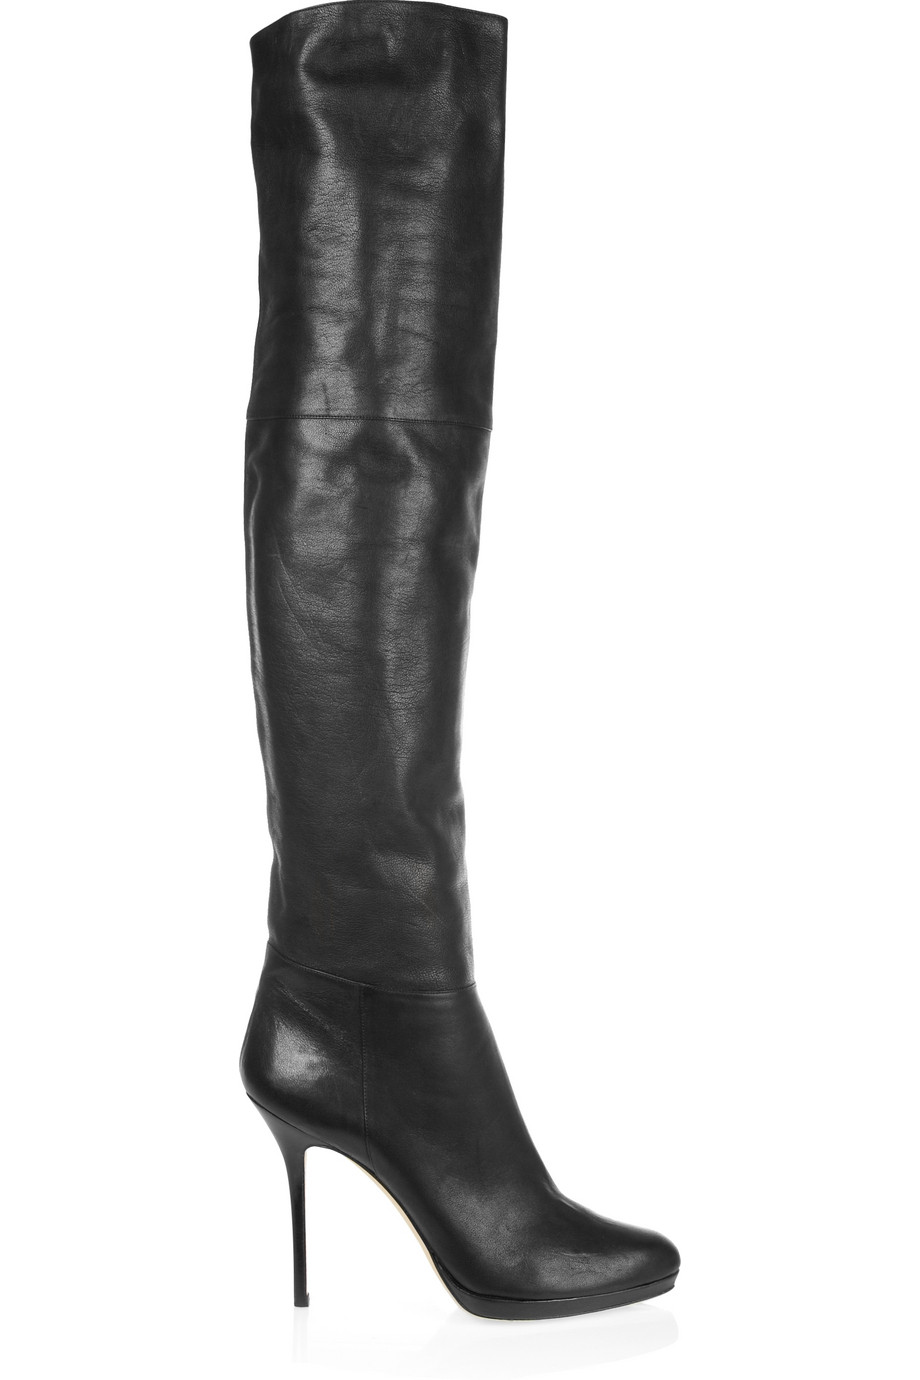 Lyst - Jimmy Choo Black Leather April Thigh-high Boots in Black